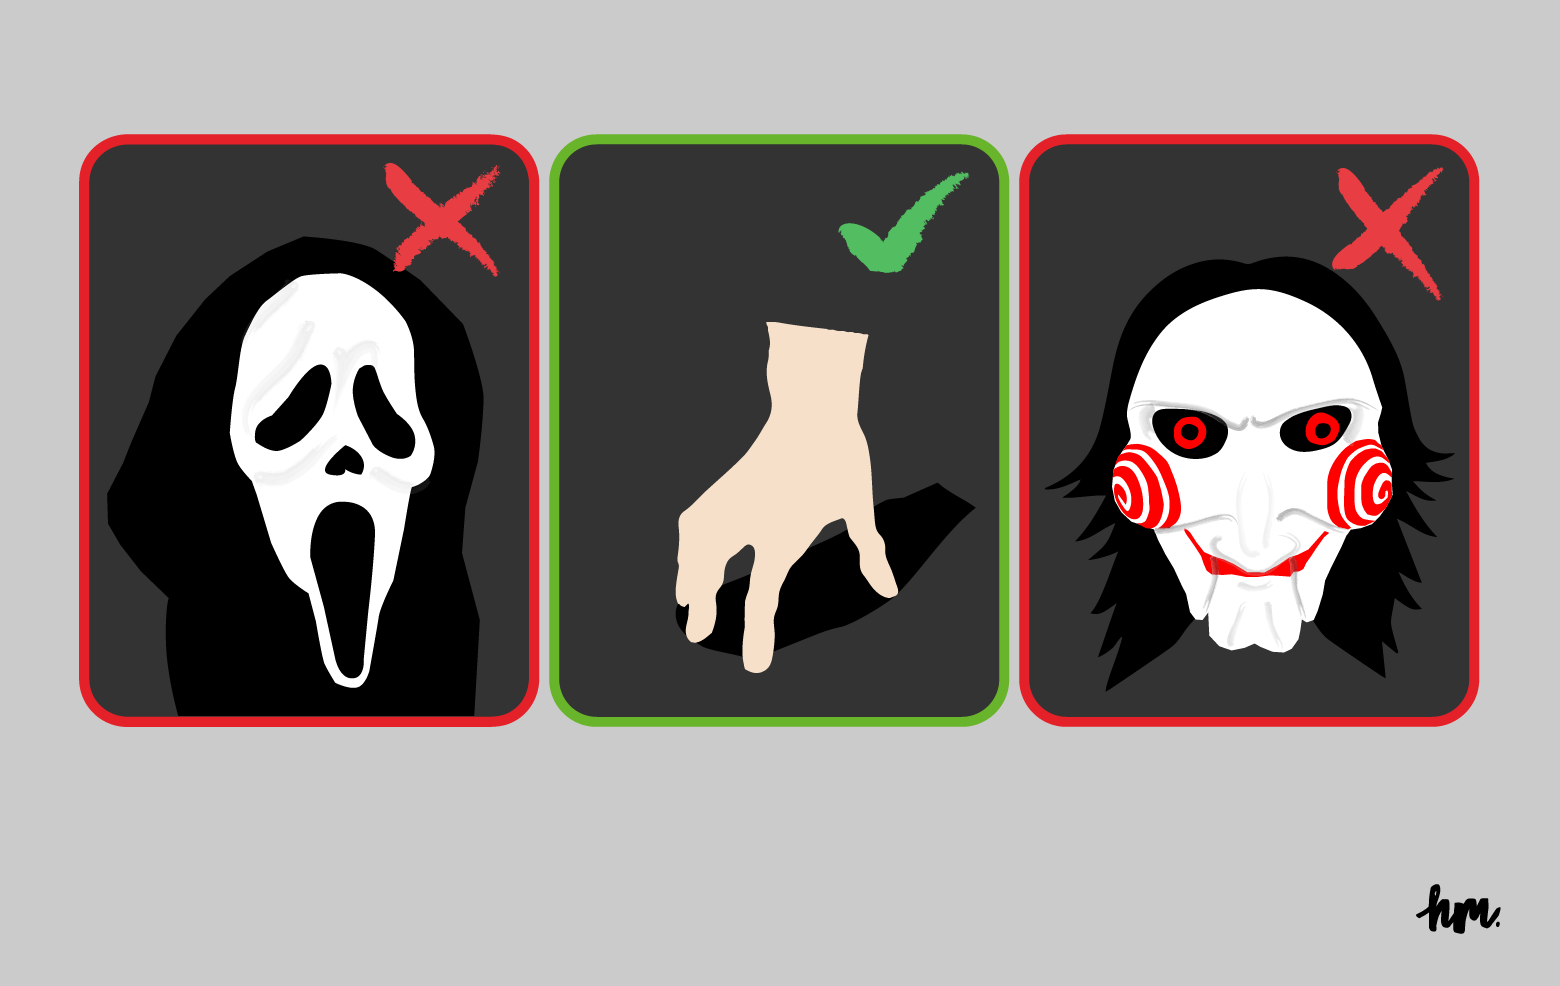 Illustration of three characters from Halloween movies: the mask from Scream, the face of Jigsaw from Saw, and the thing from The Adams Family. The thing has a green checkmark next to it, while the other two each have a red x next to them.